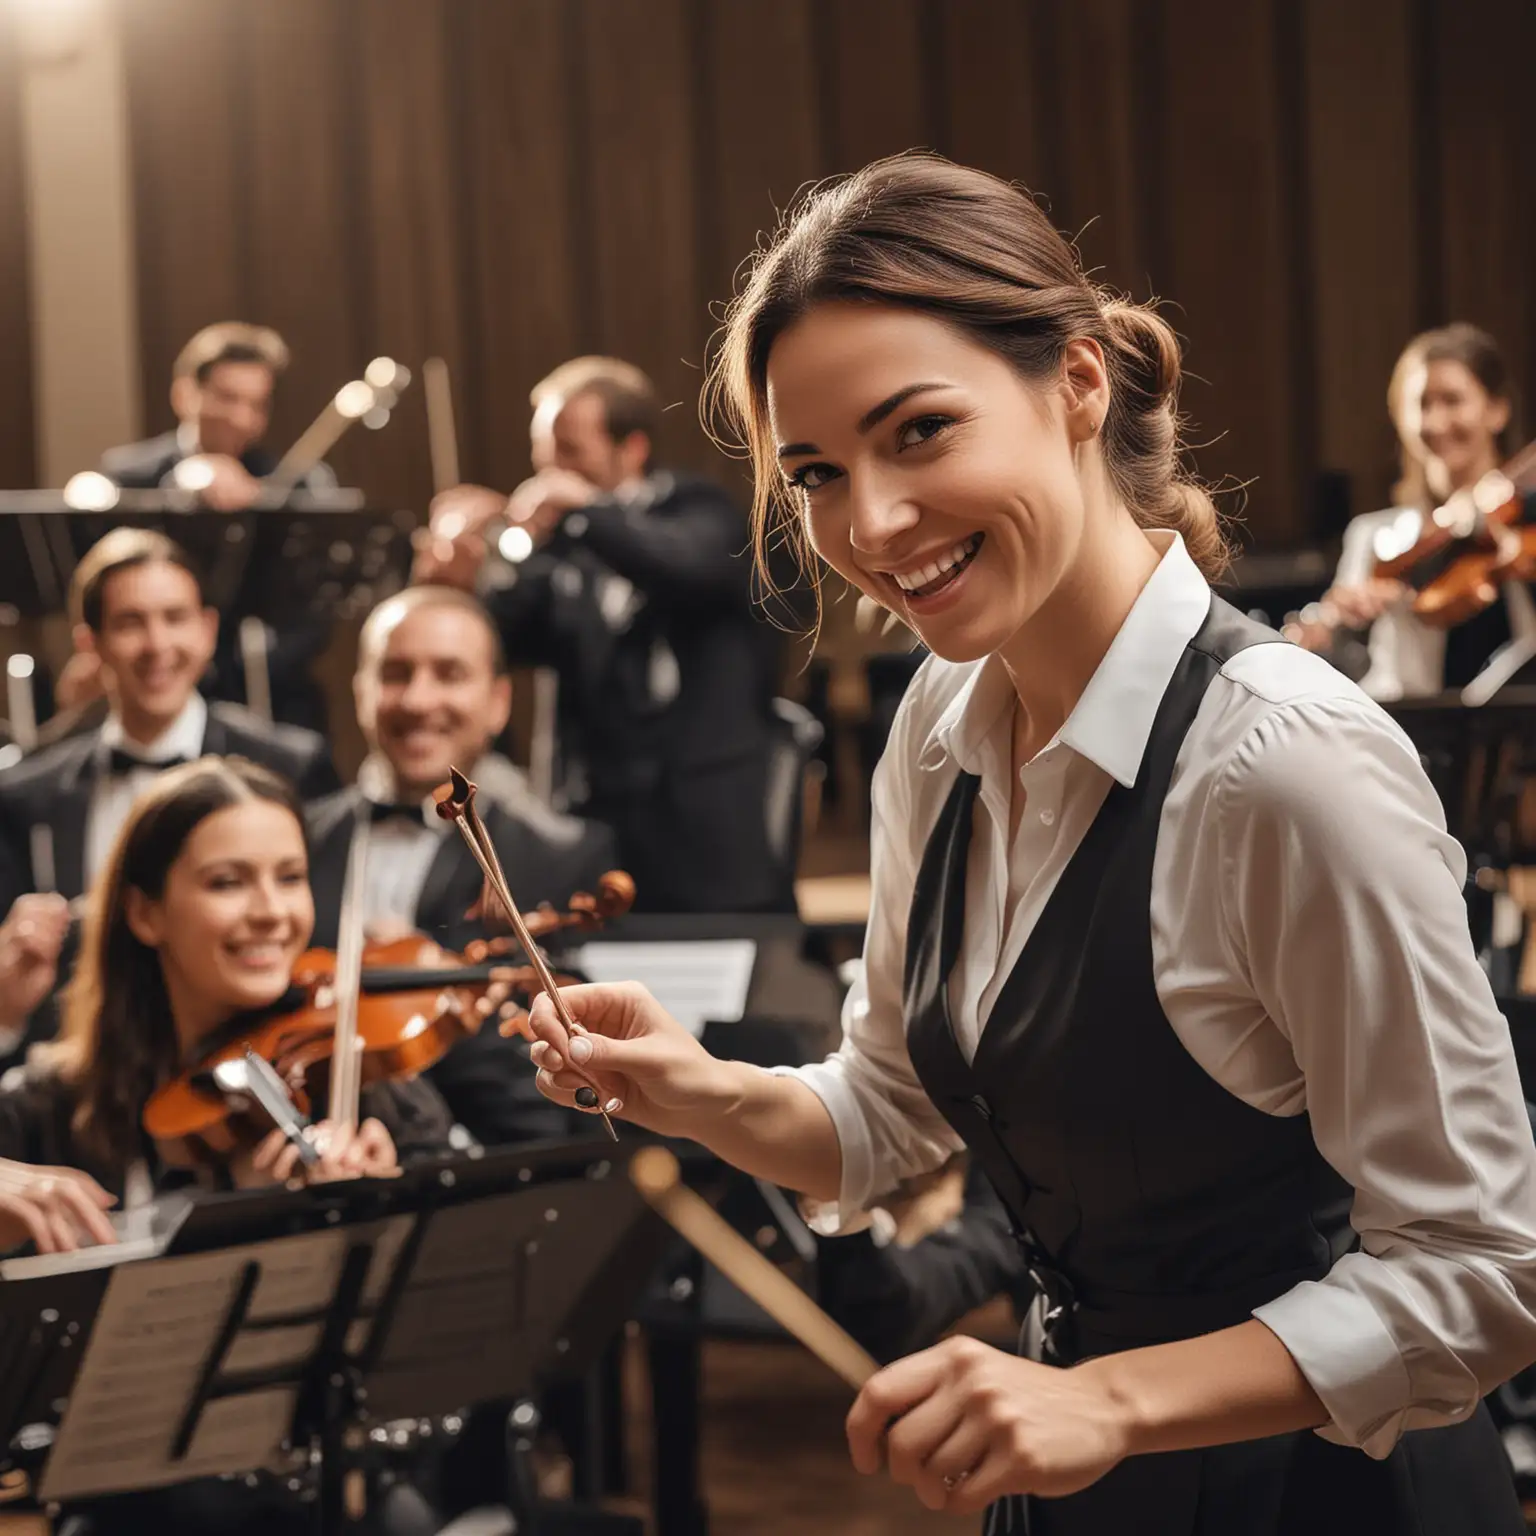 Smiling Woman Conducting Orchestra with Husband in HighQuality Photo